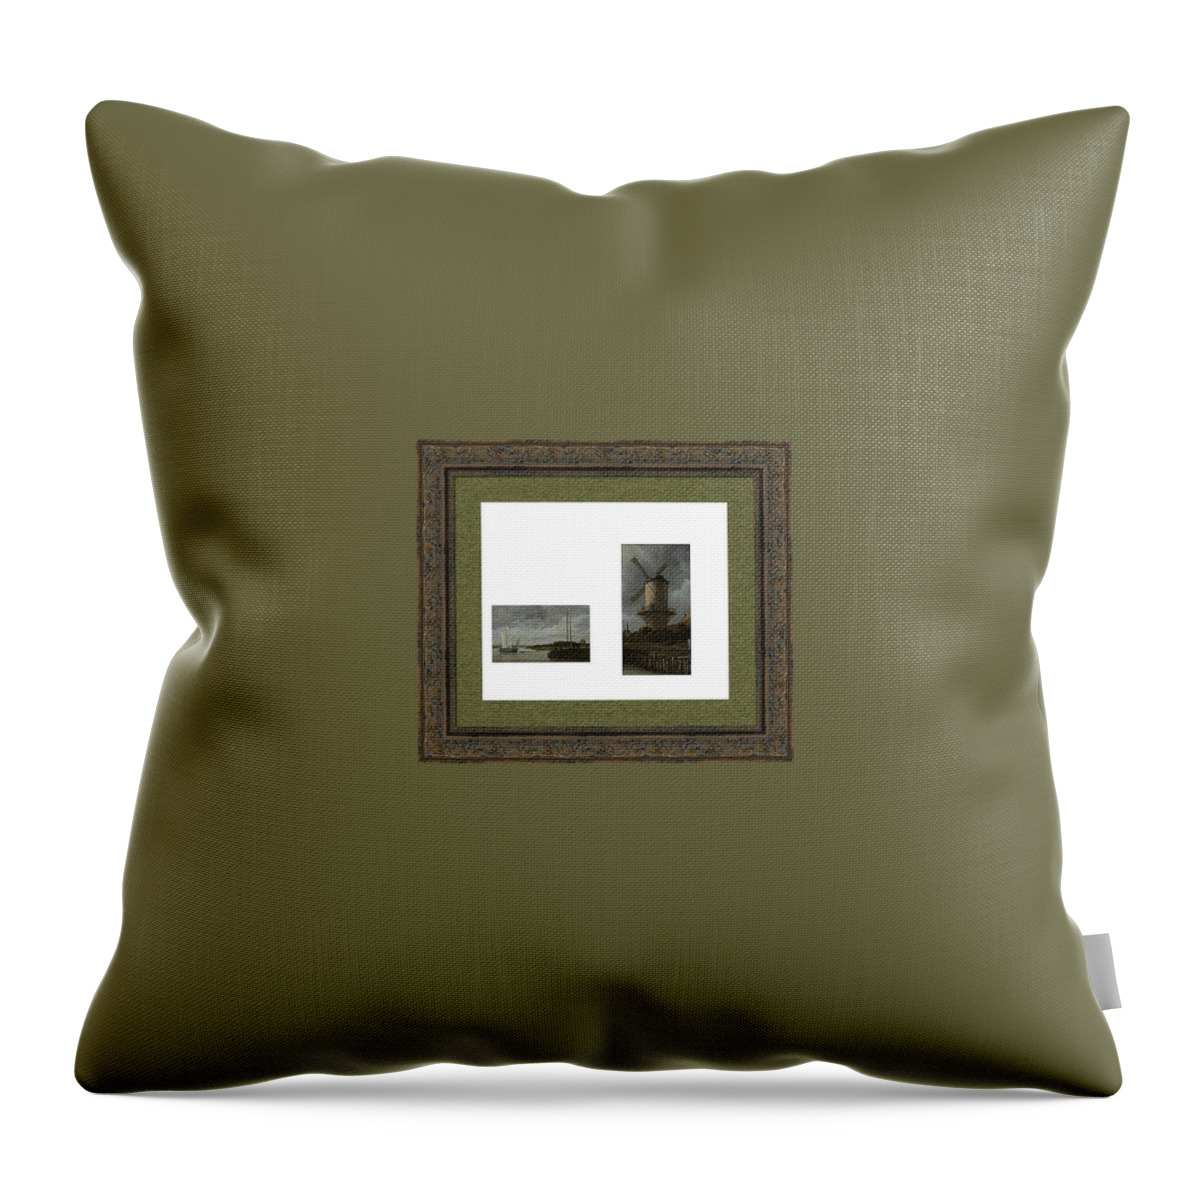  Throw Pillow featuring the digital art Black and White Collection by David Bridburg